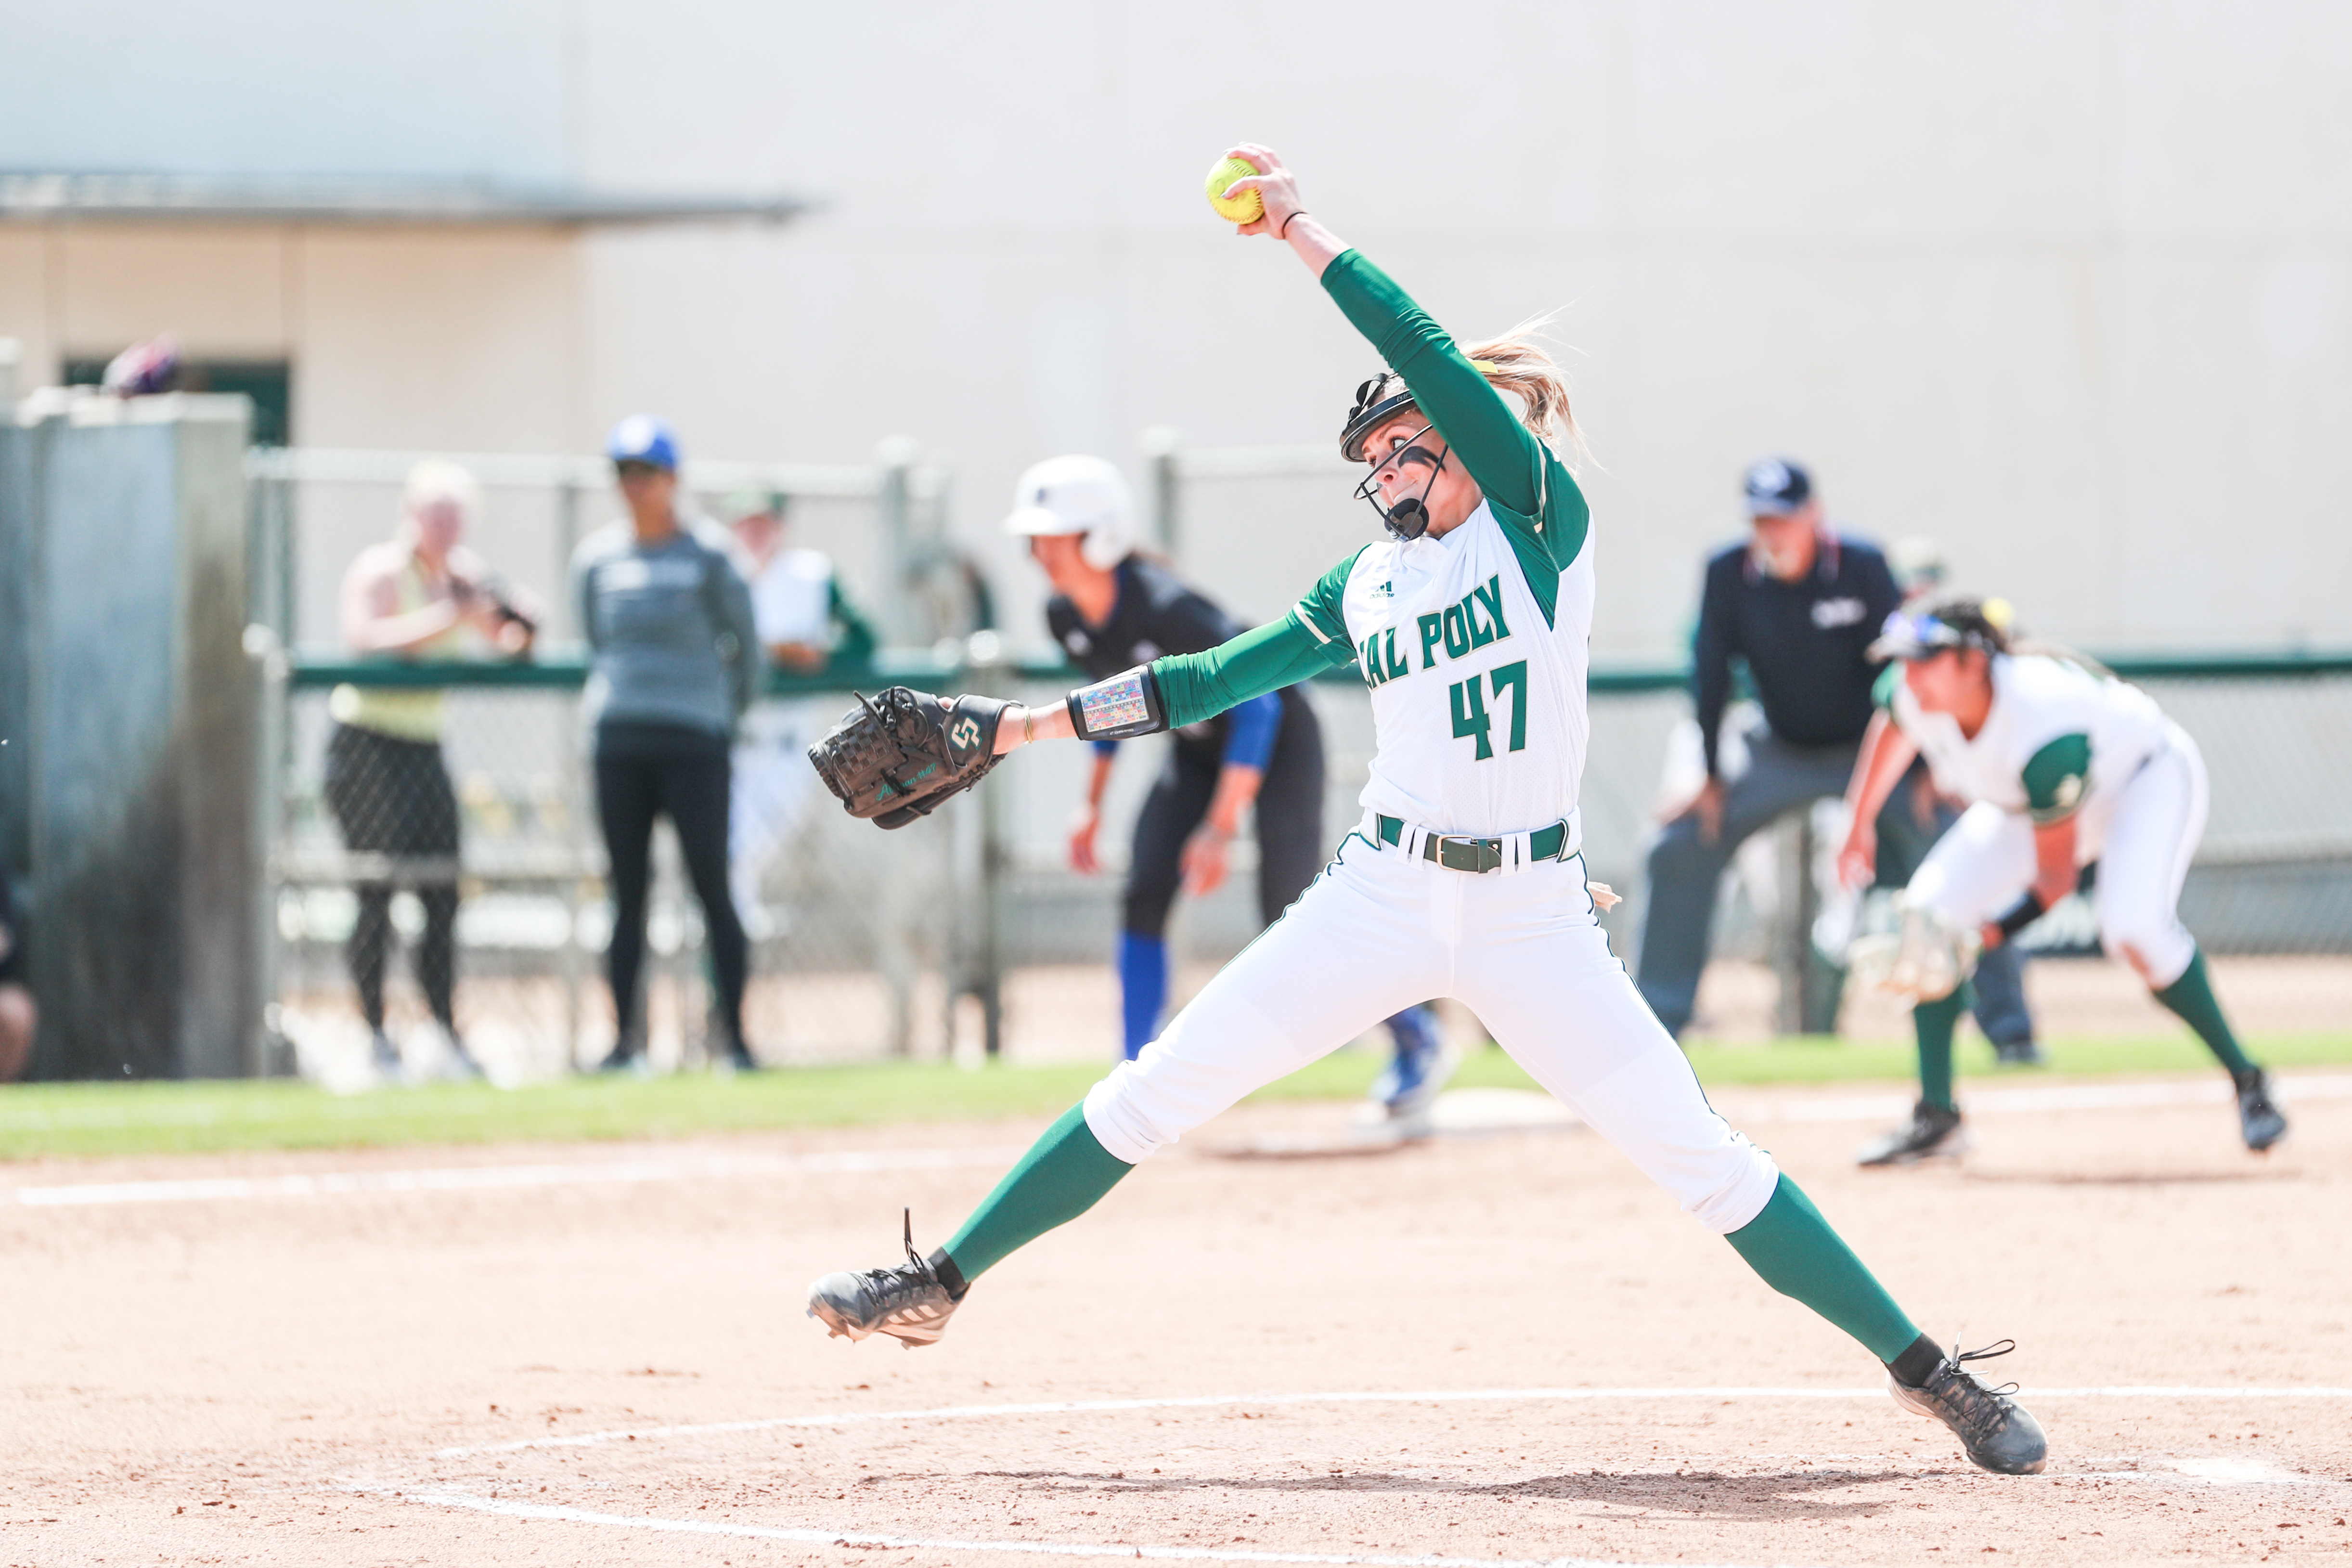 A woman wearing a Cal Poly softball uniform pitches a ball from the pitcher's mound.